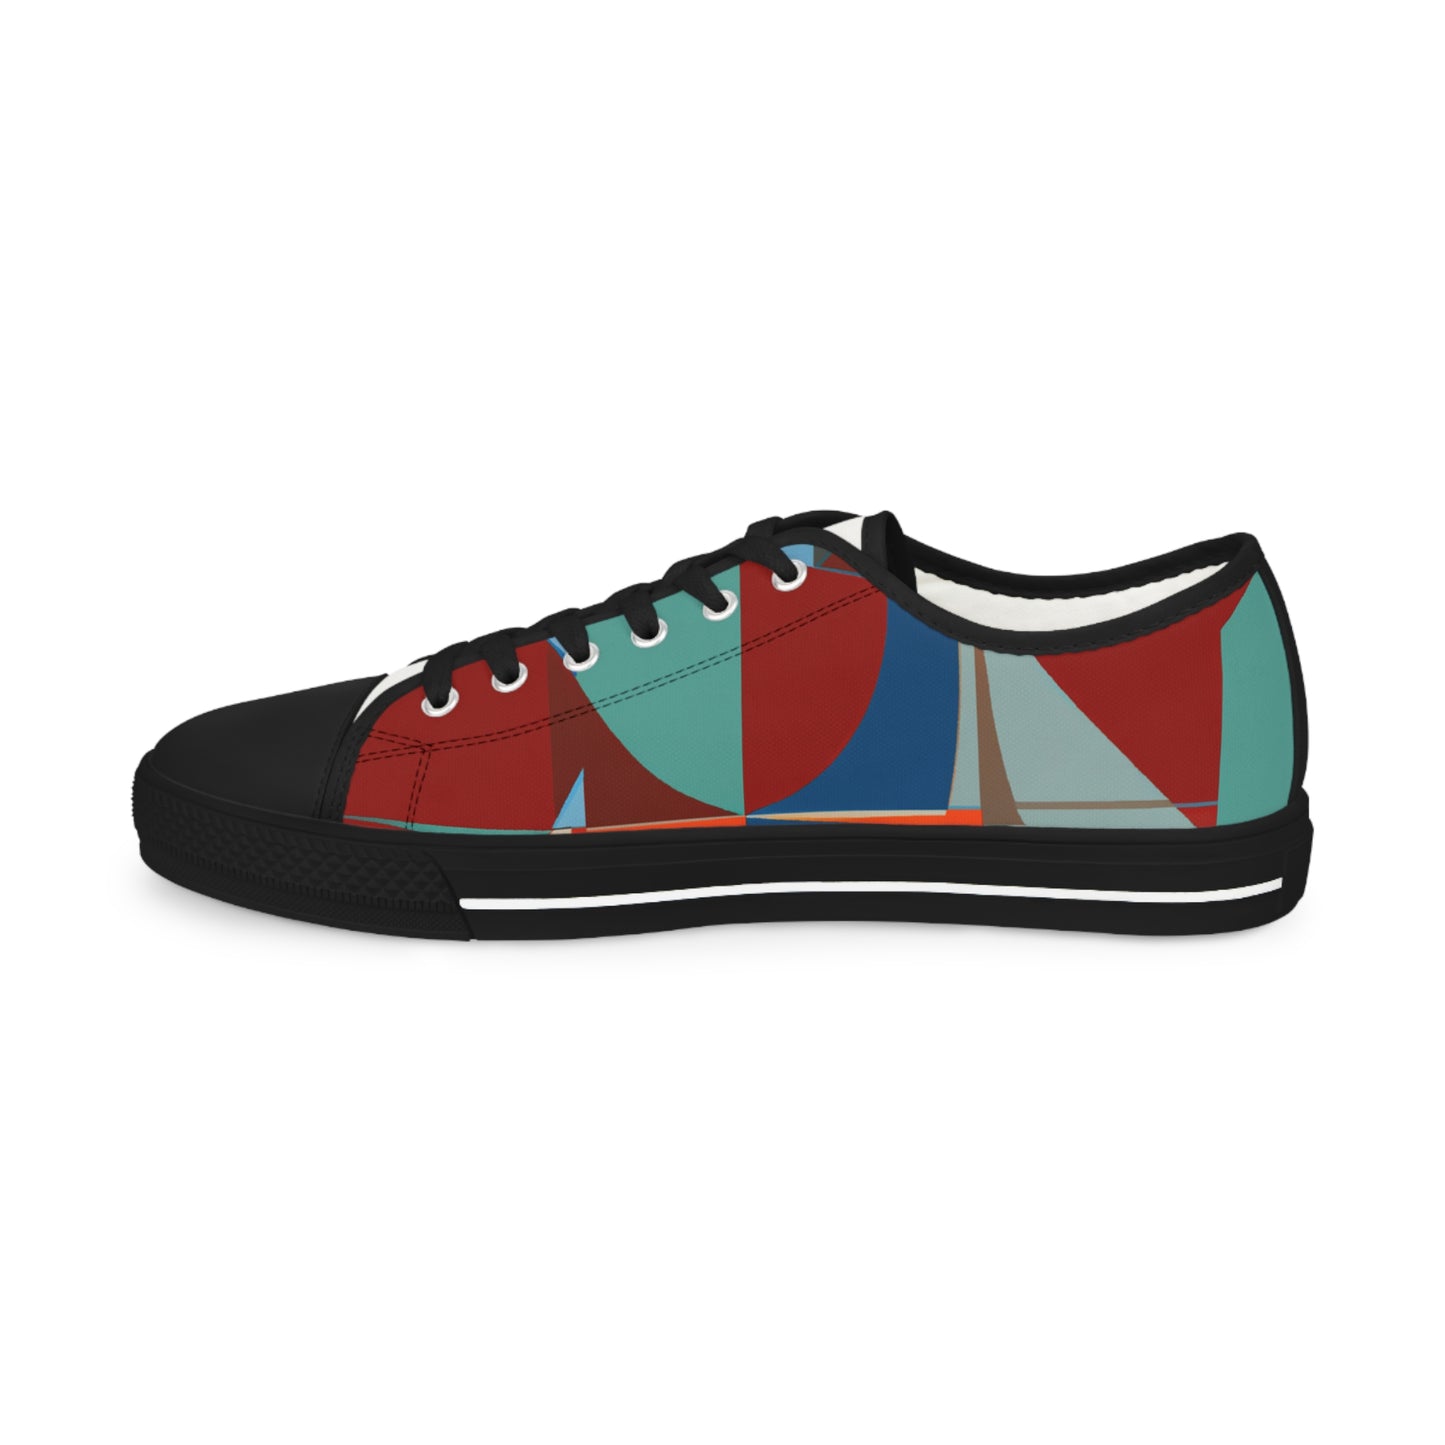 Basilio Barotelli - Low Top Shoes